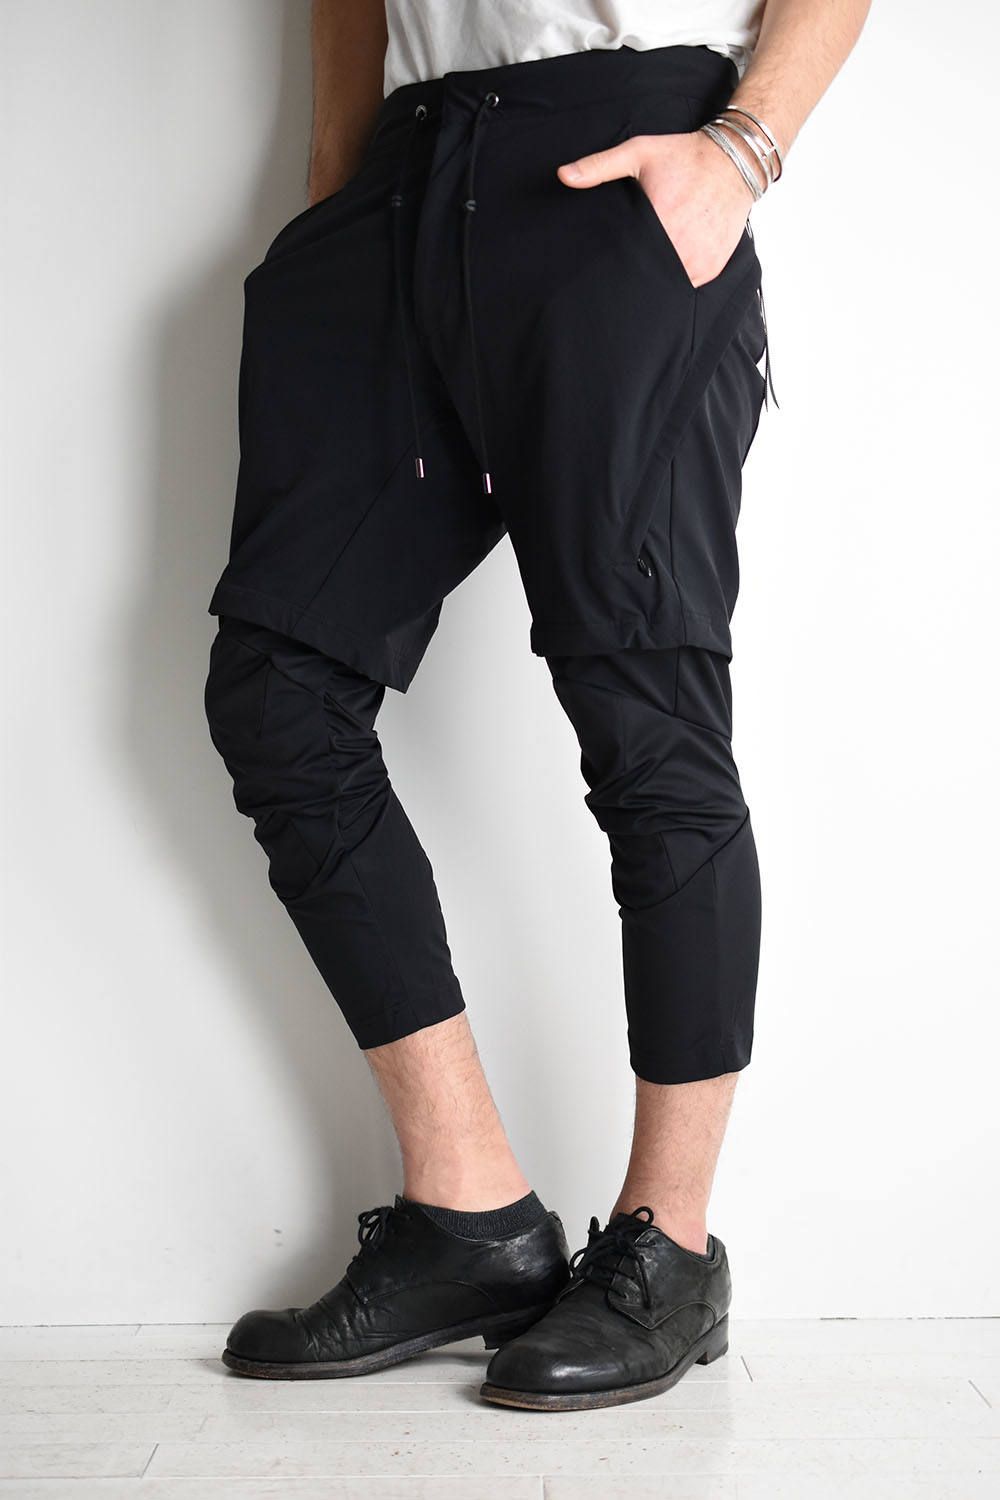 CIVILIZED - Survival Layered Pants『cropped』